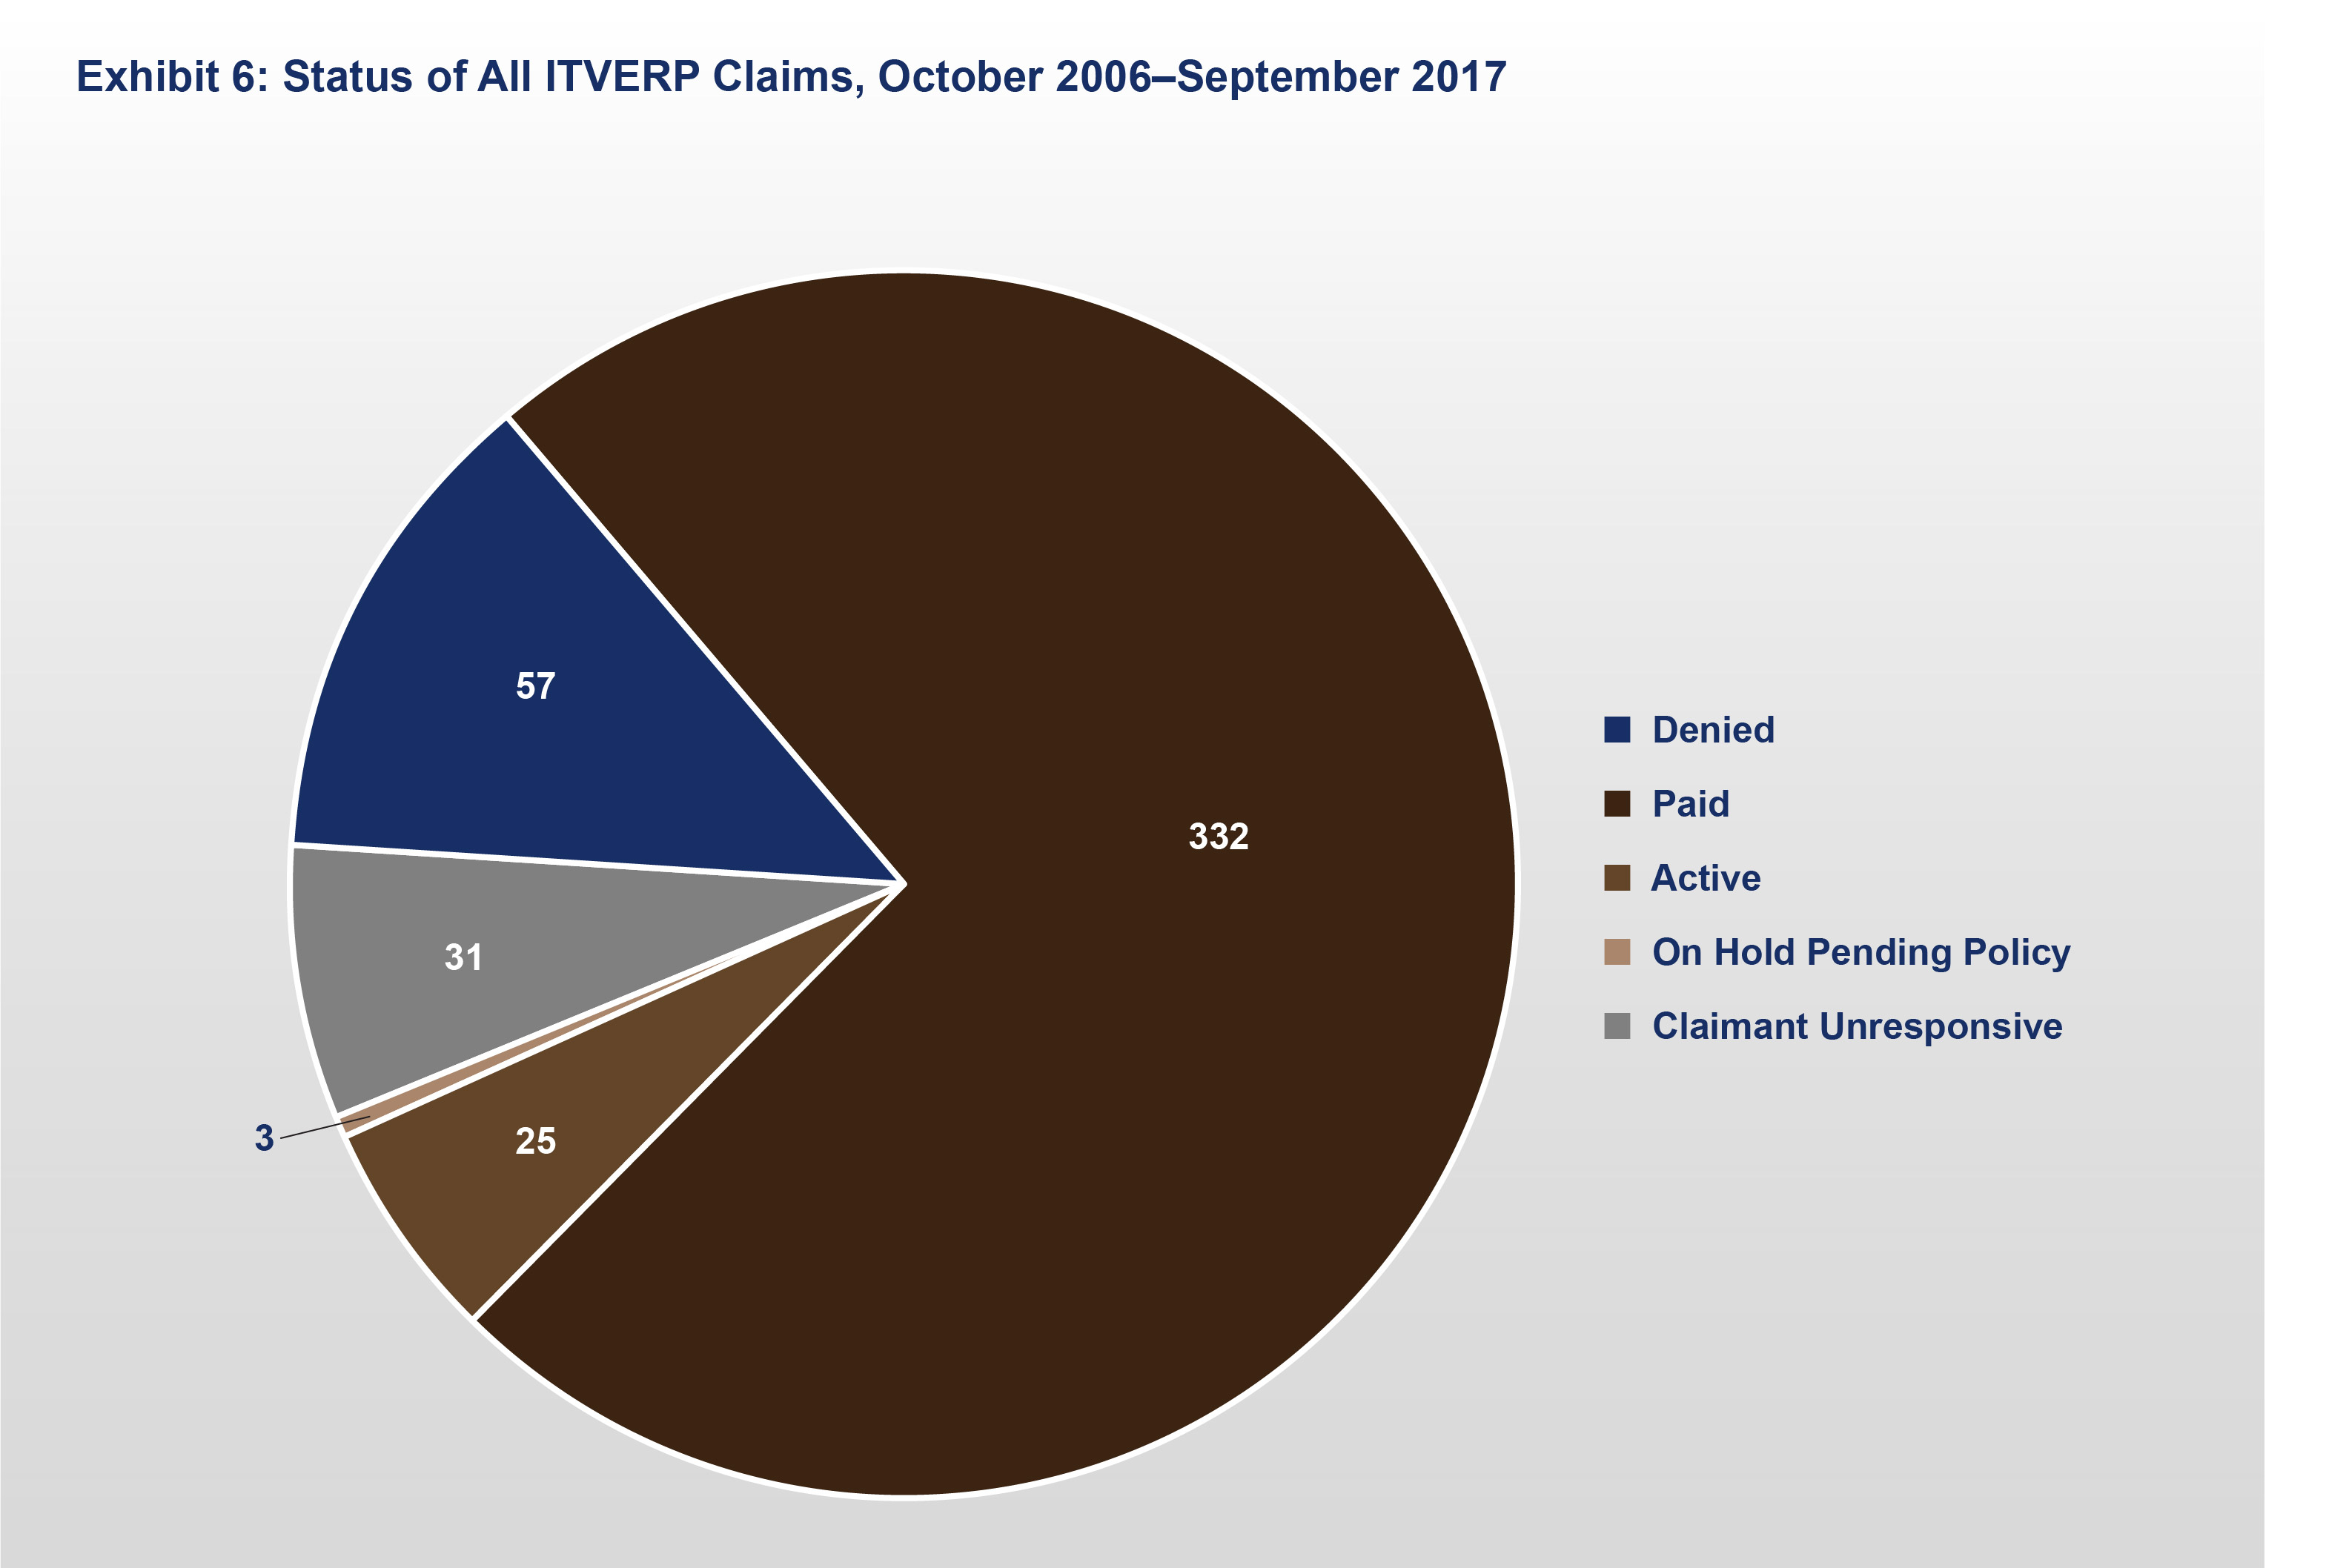 Exhibit 6: Status of All ITVERP Claims October 2006 - September 2017